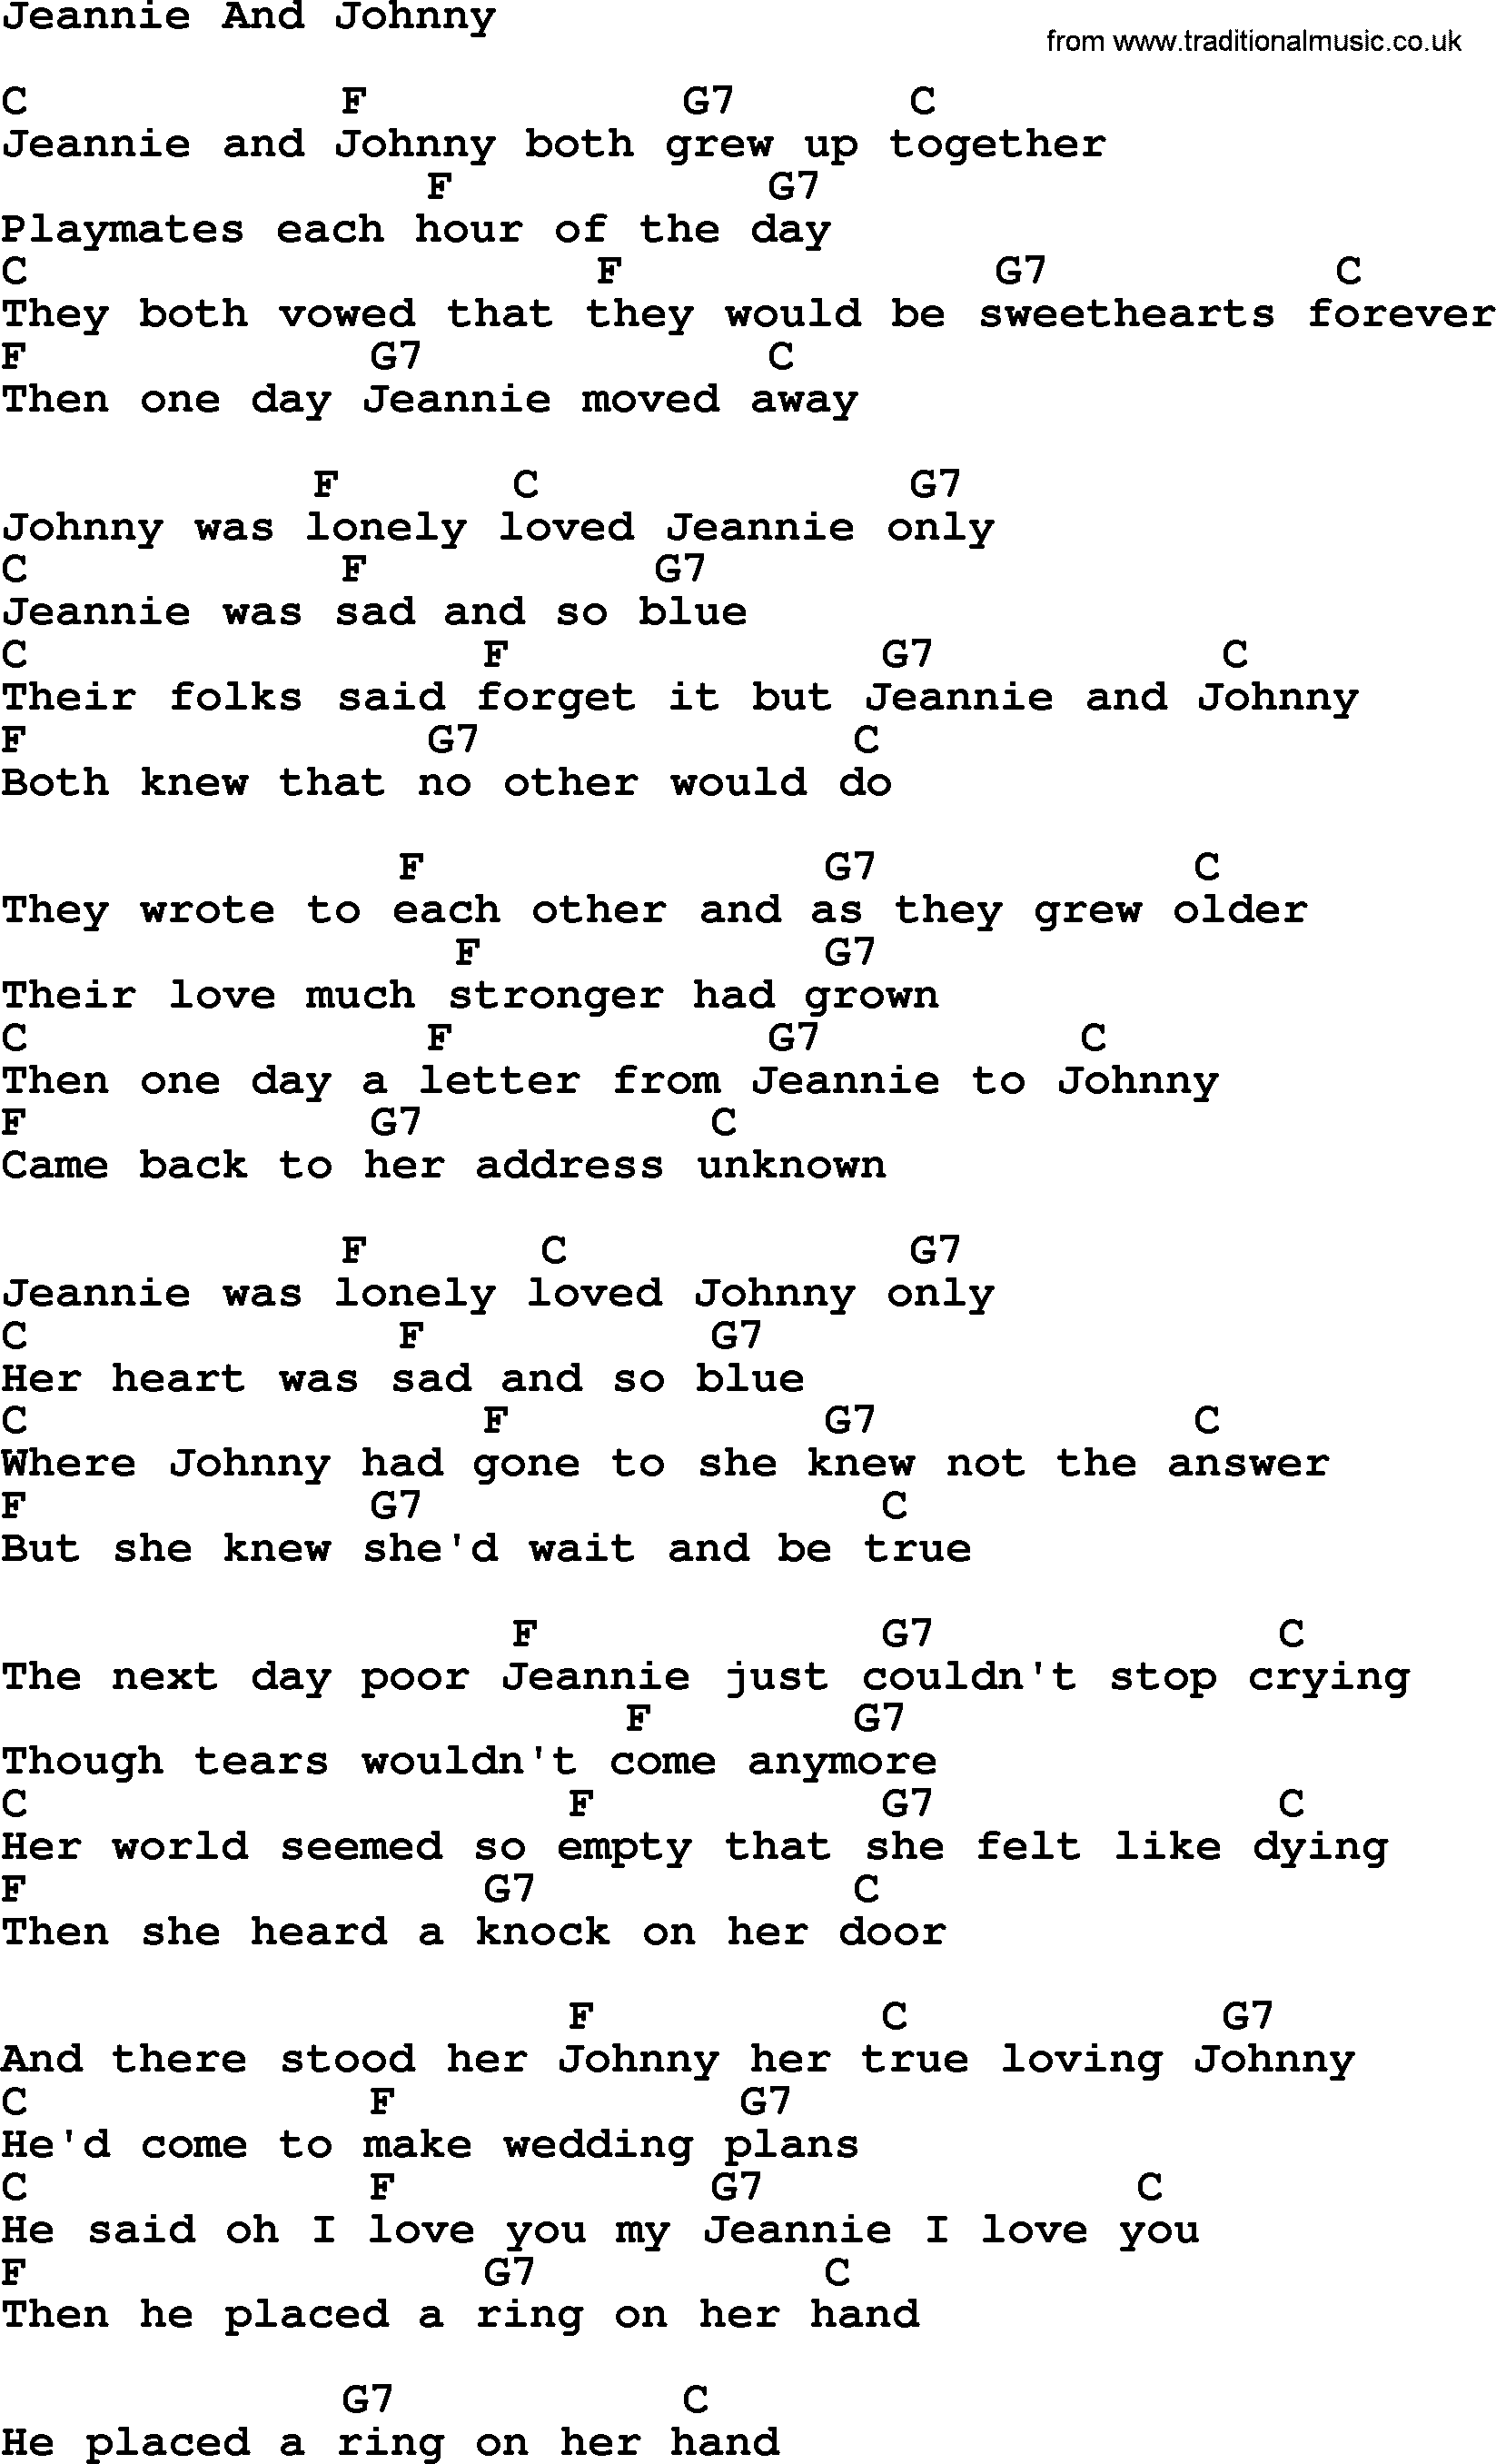 Marty Robbins song: Jeannie And Johnny, lyrics and chords